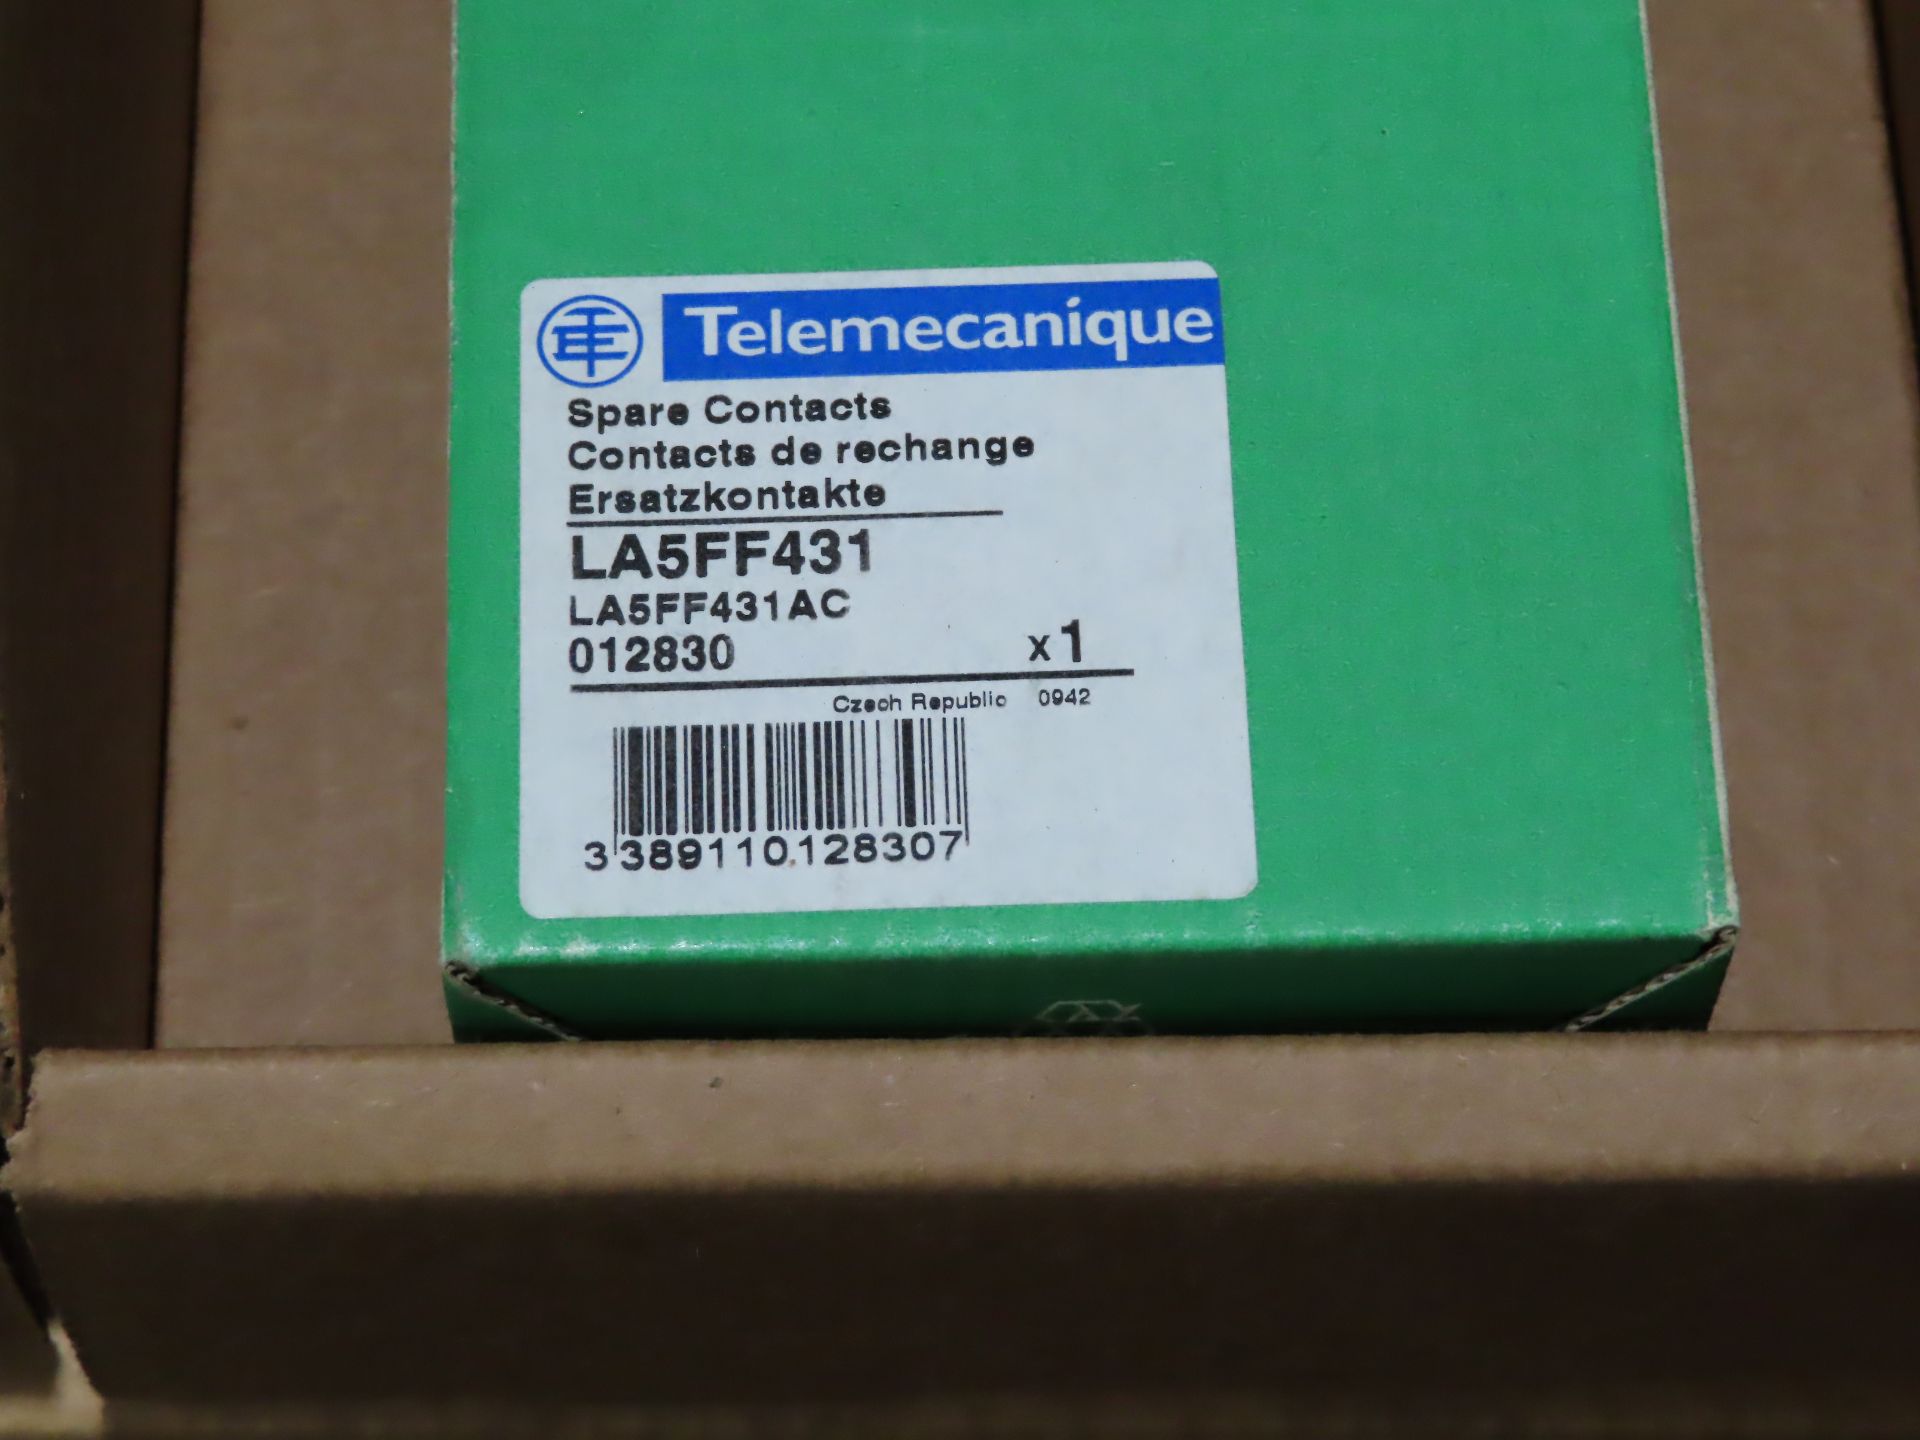 Qty 2 Telemecanique Model LA5FF431 spare contacts, new in boxes, as always with Brolyn LLC auctions, - Image 2 of 2